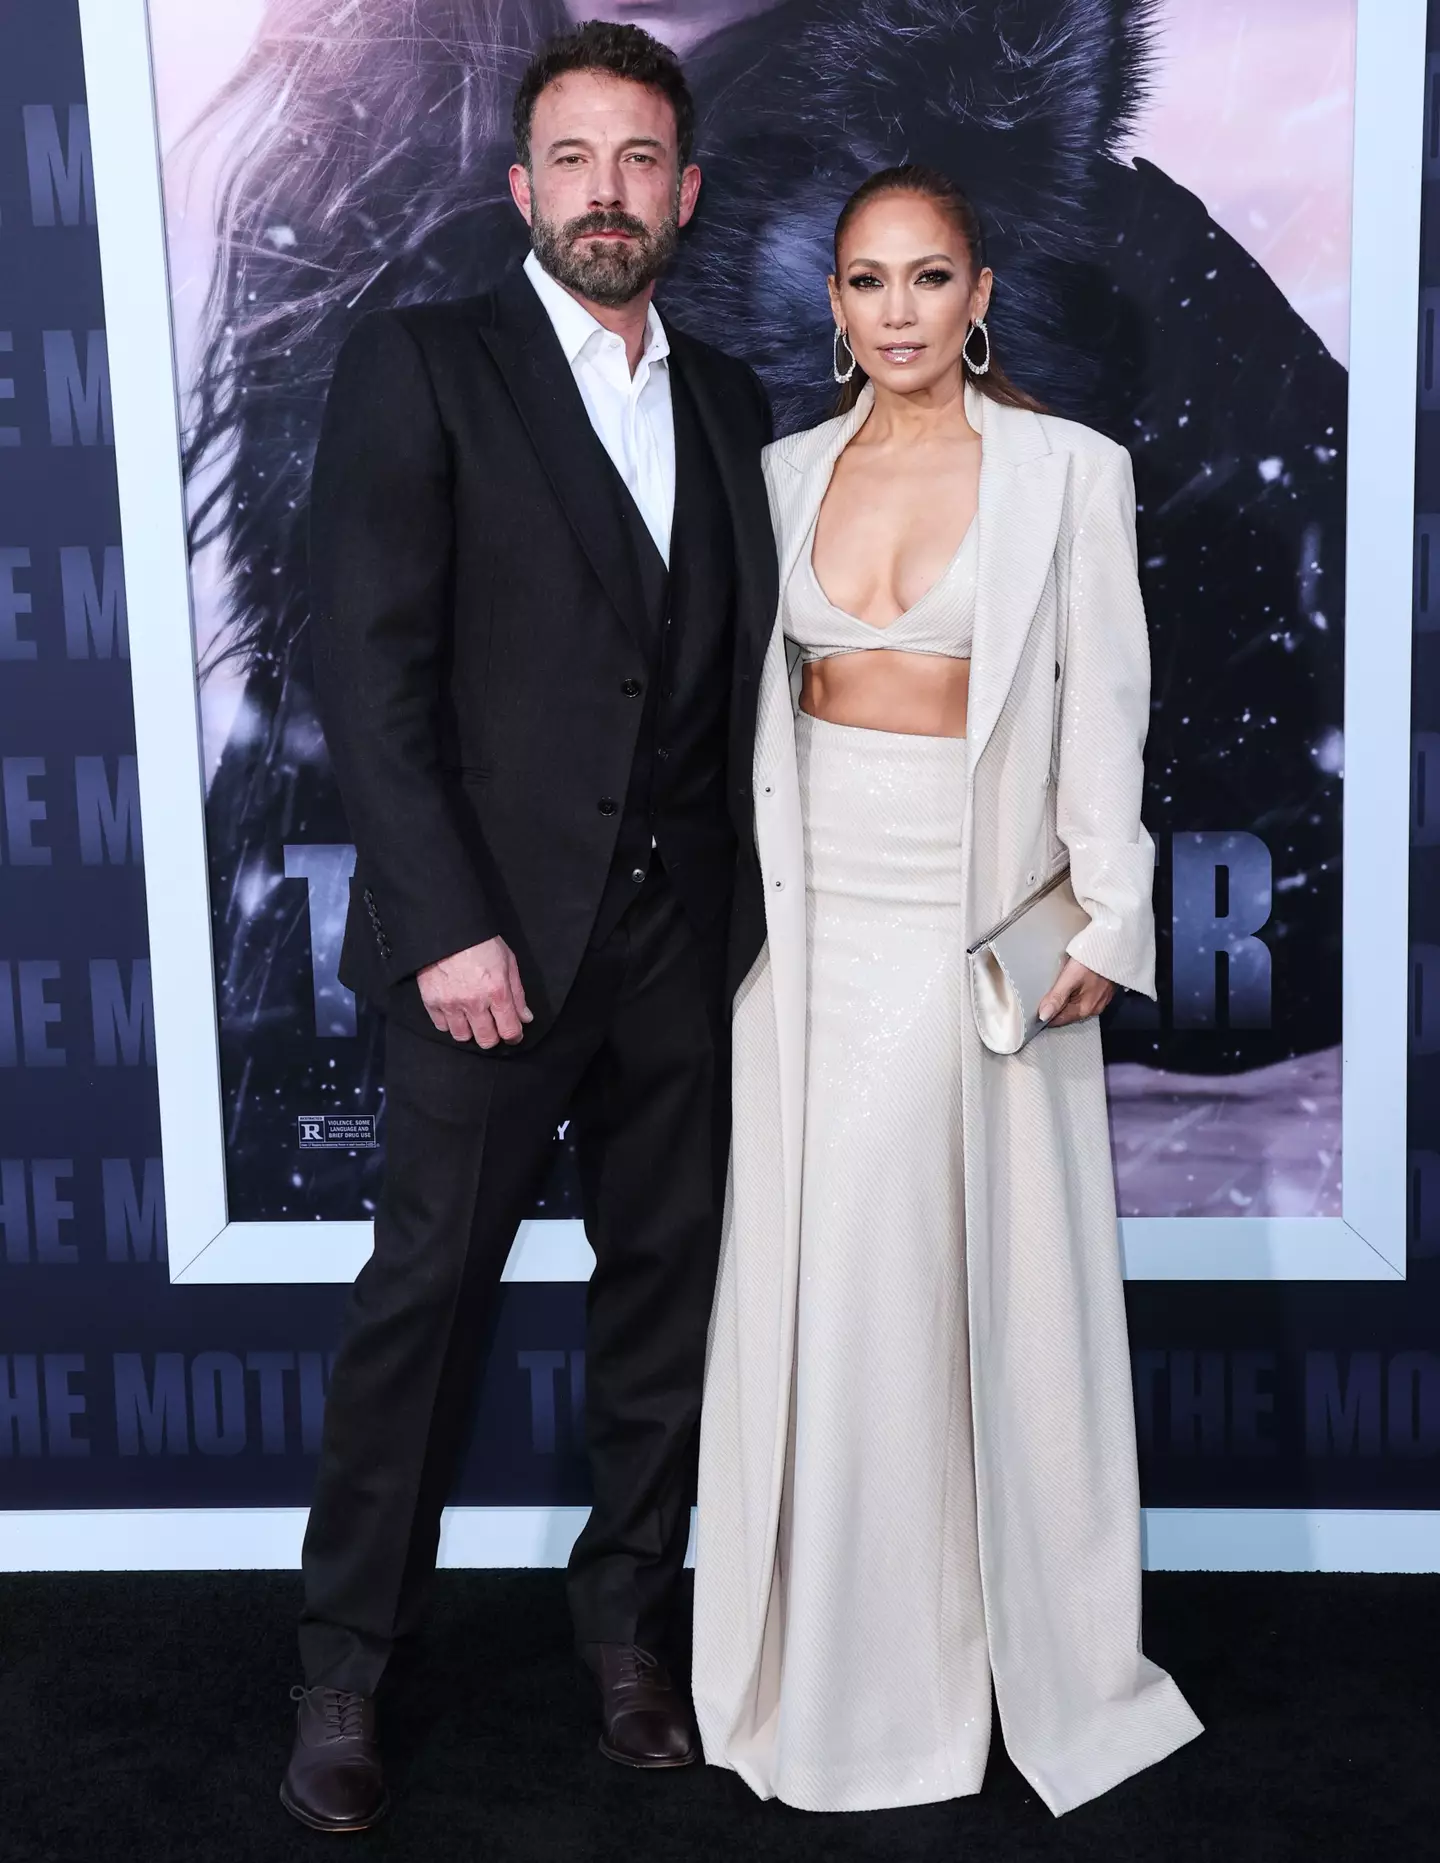 Affleck and Lopez attended the red carpet premiere for The Mother.